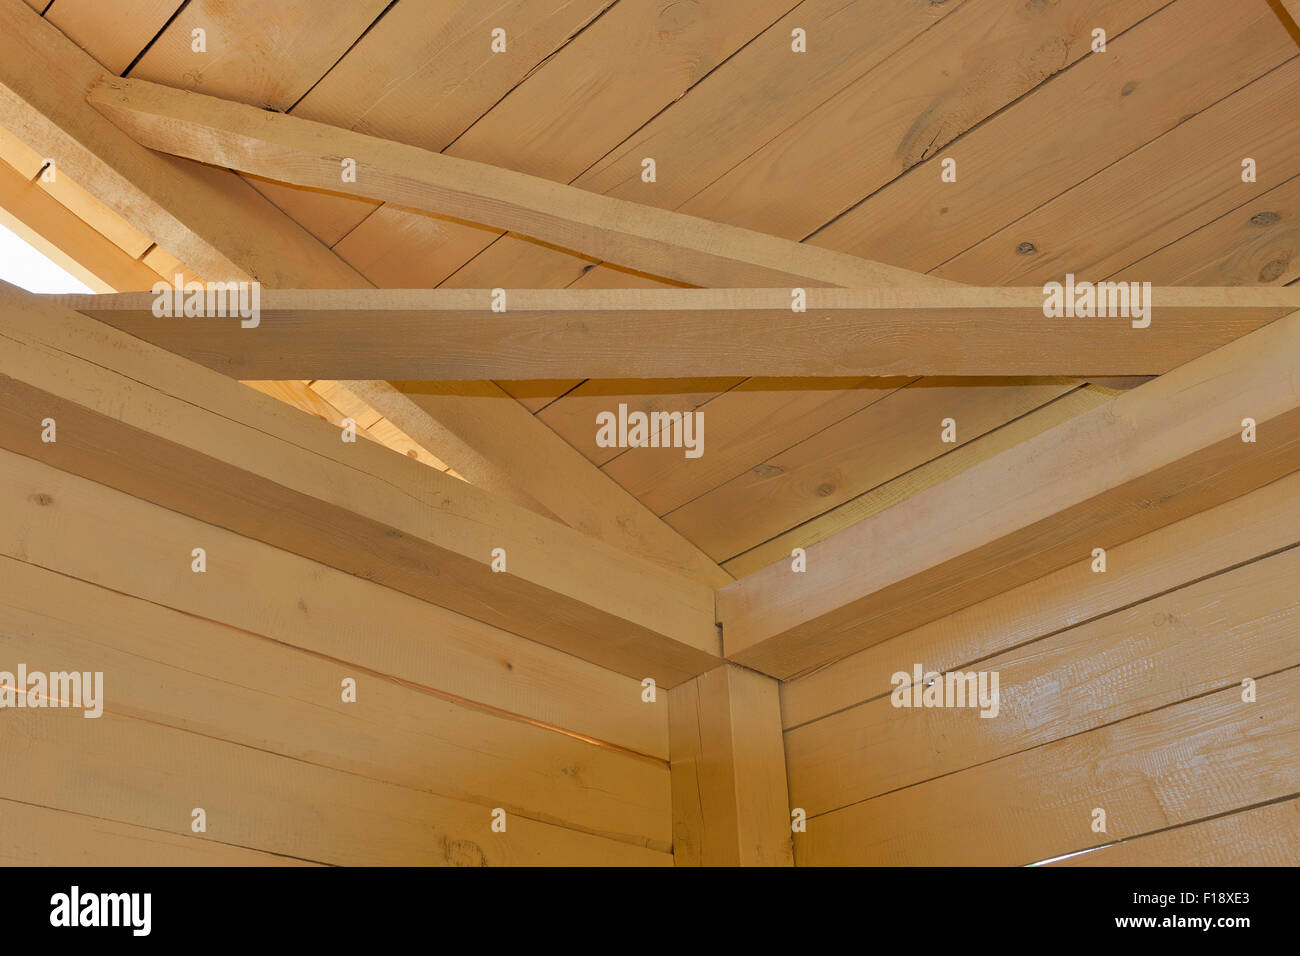 interior view of the construction of a pitched roof showing the ridge, rafters and sheathing Stock Photo